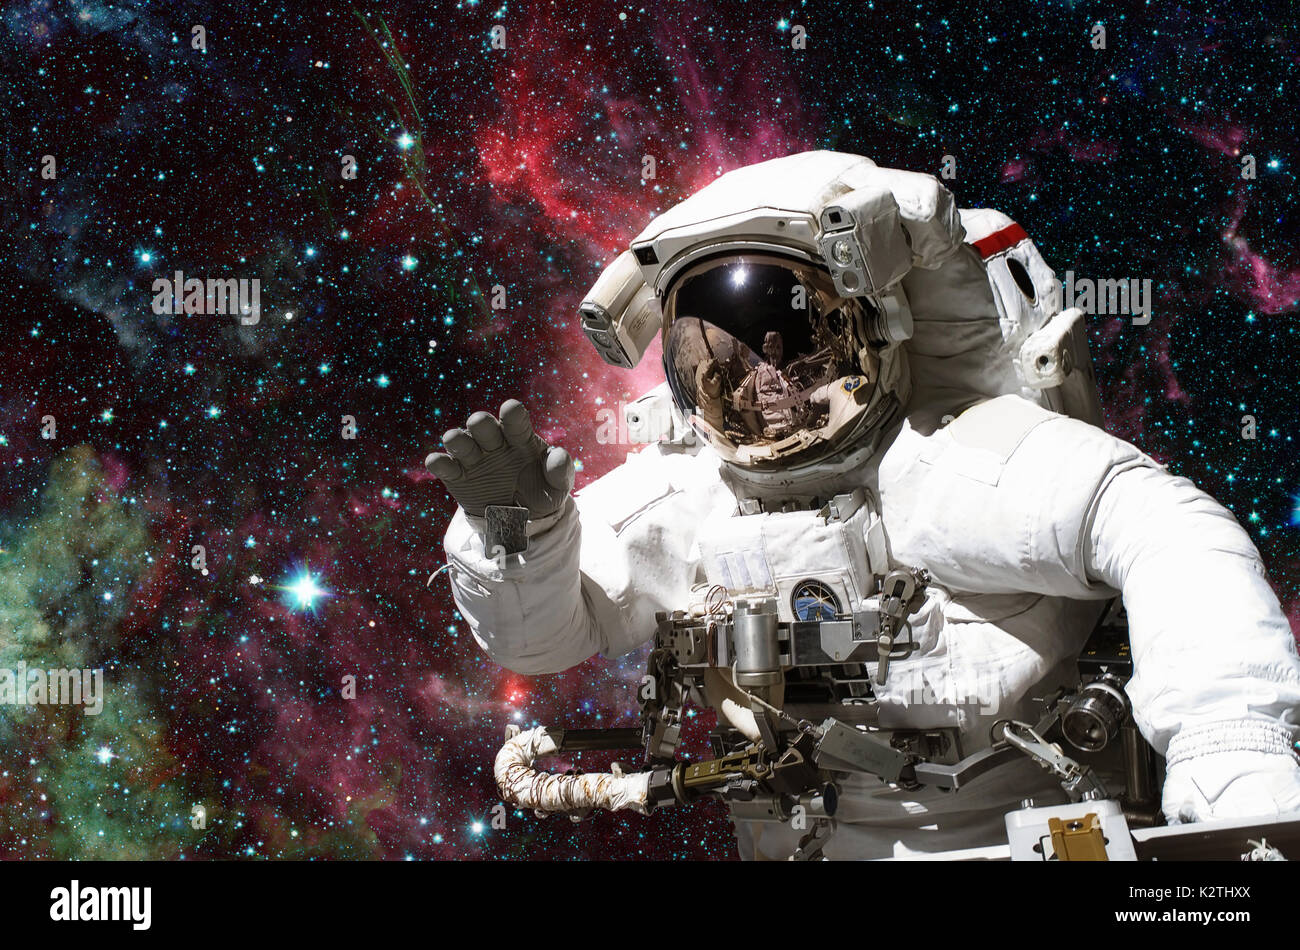 NASA space exploration astronaut. Elements of this image furnished by NASA. Stock Photo